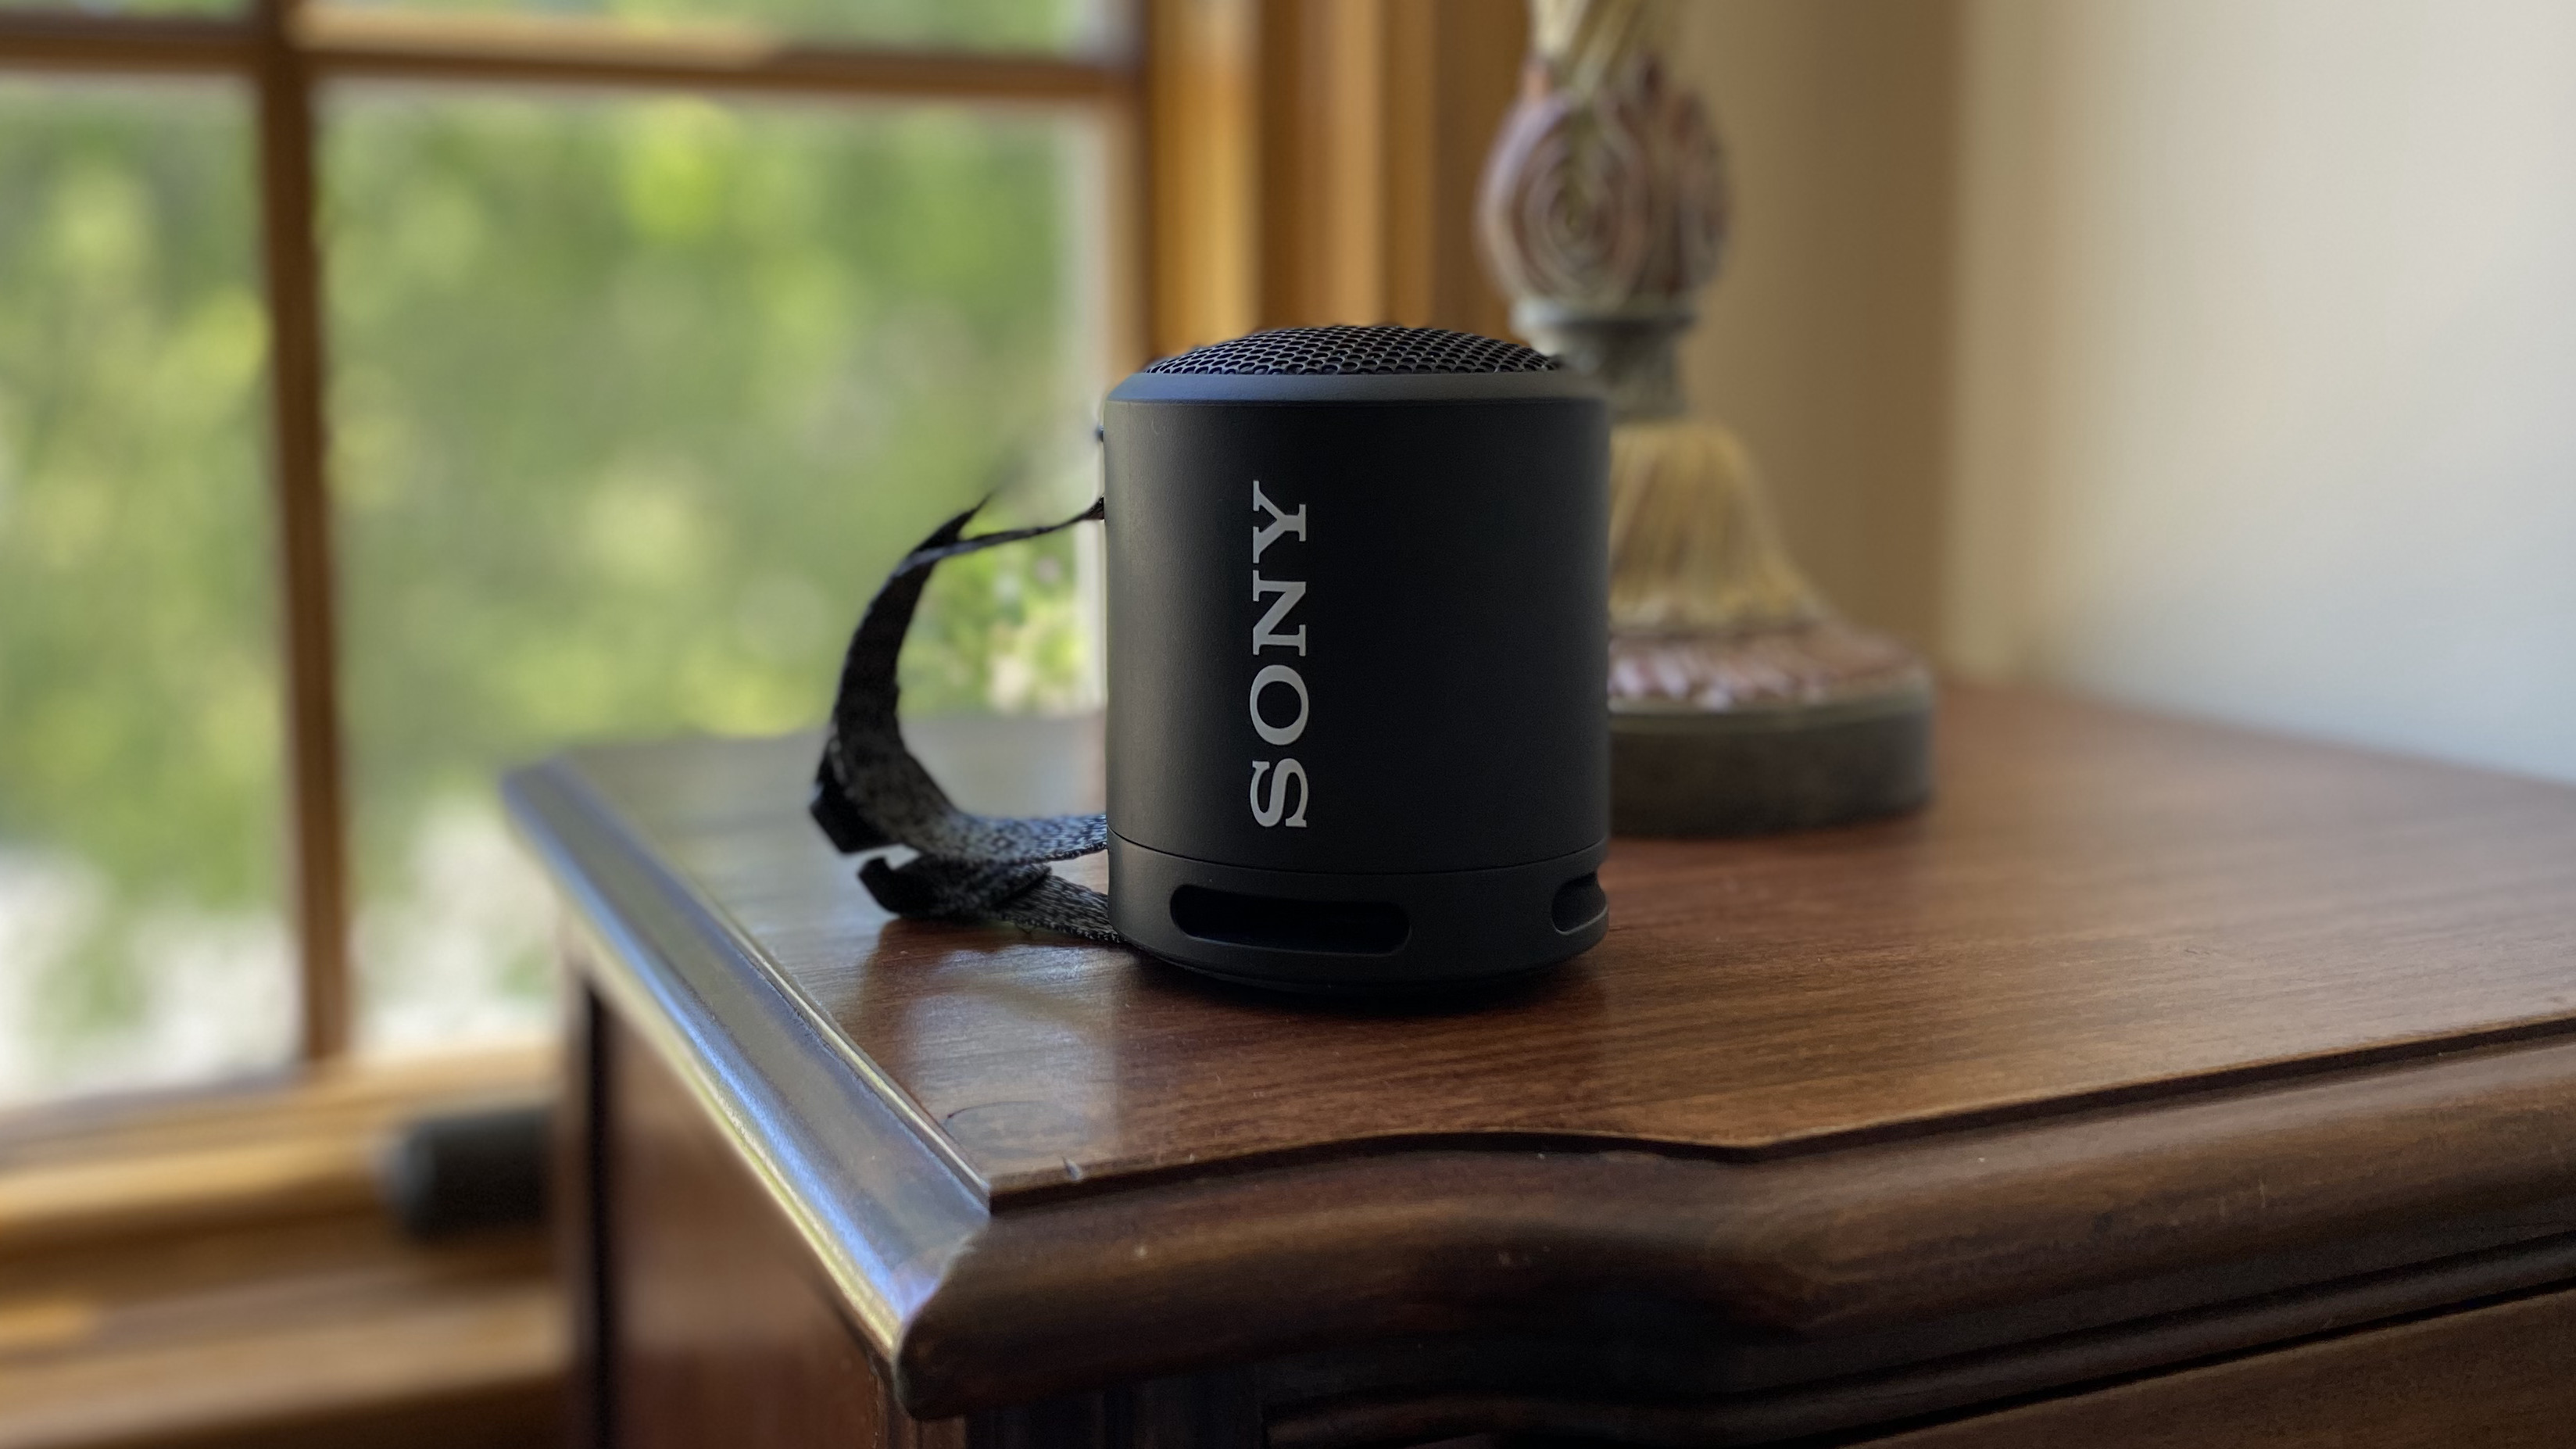 Sony SRS-XB13 review - STEREO GUIDE